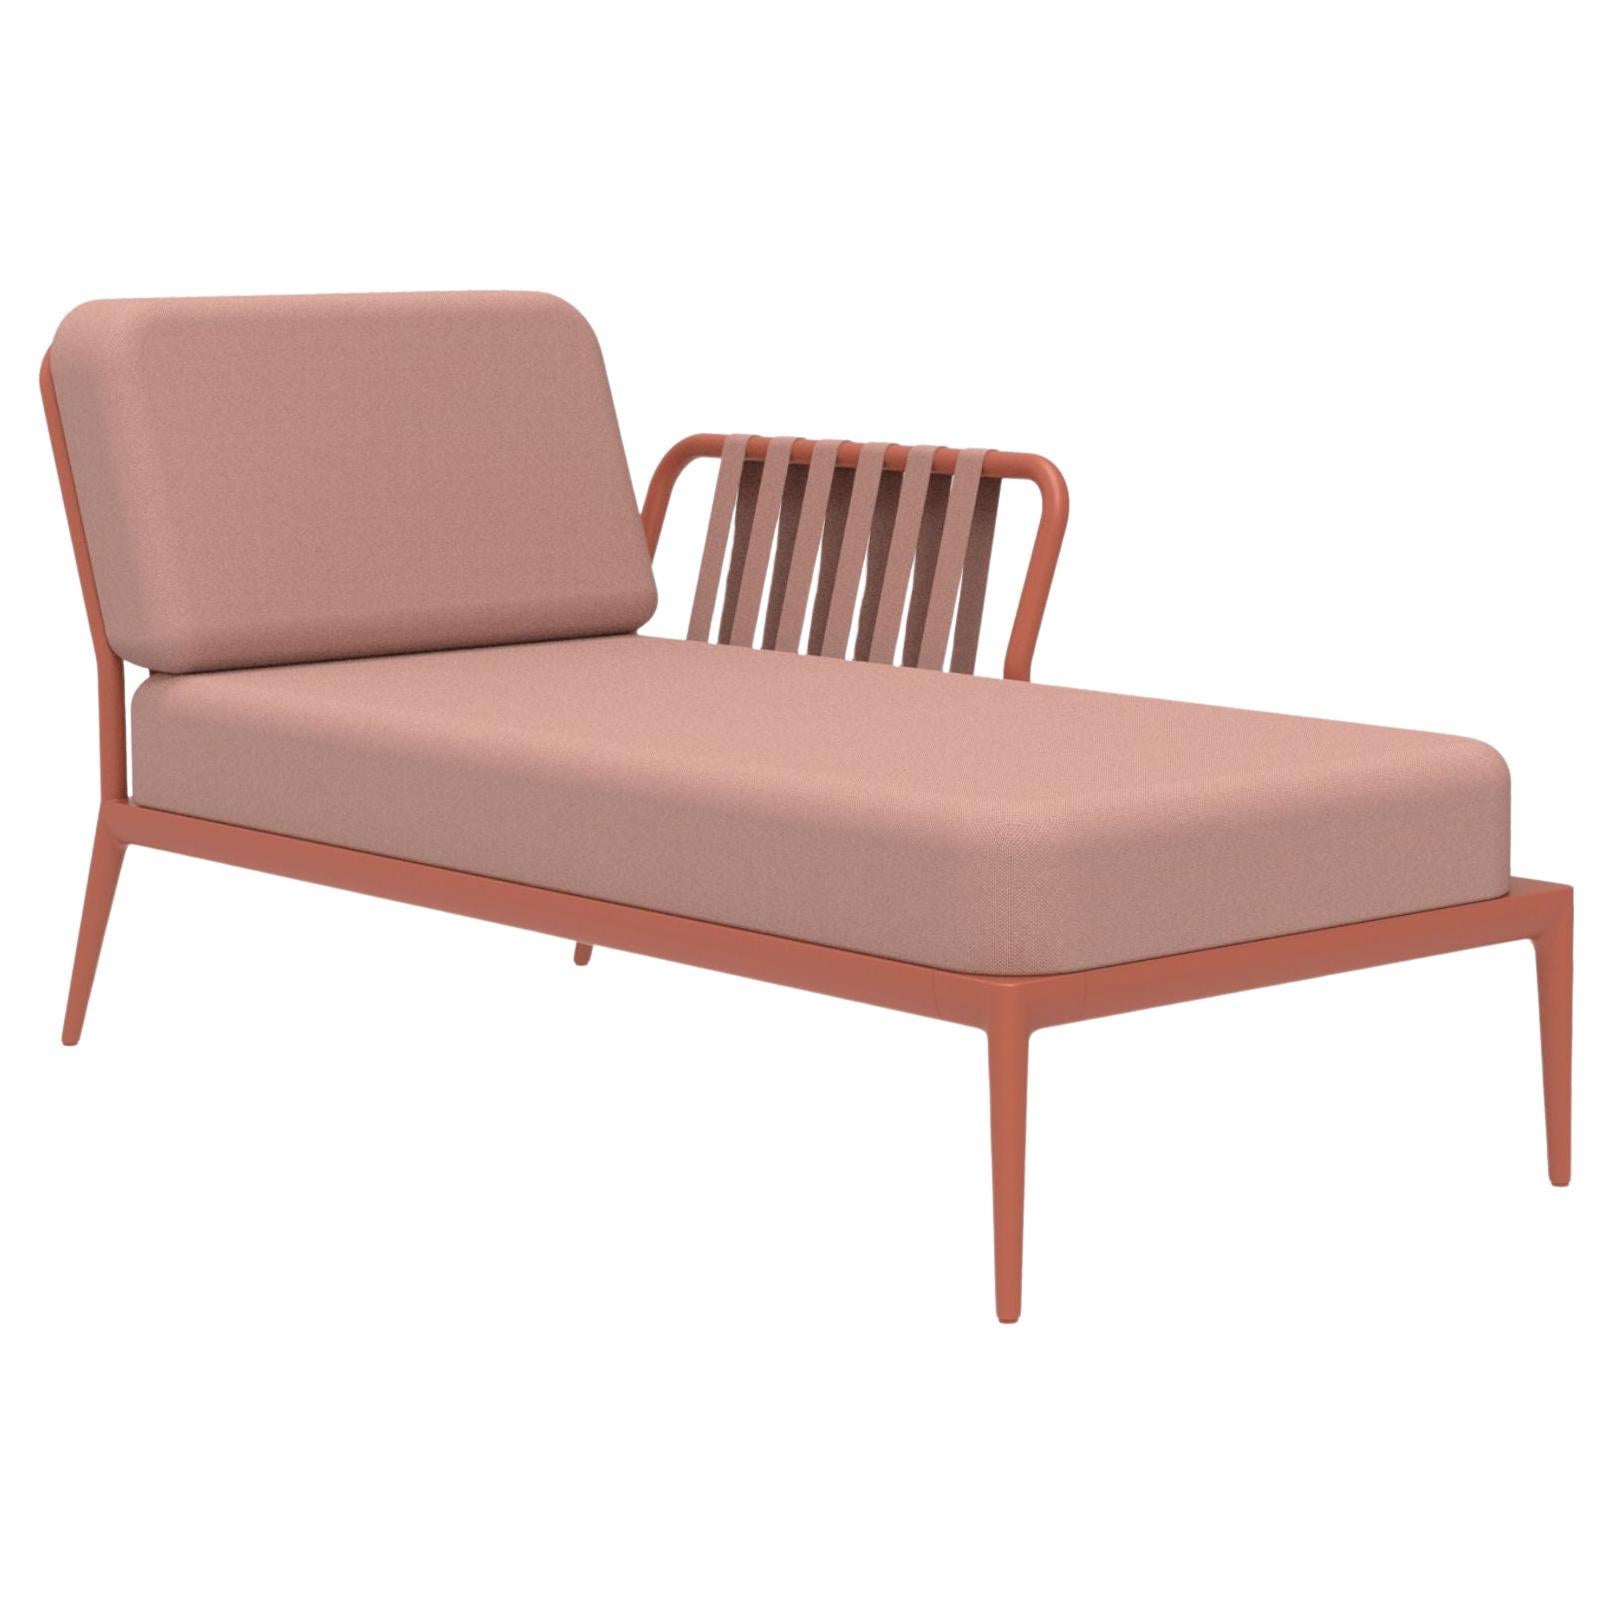 Ribbons Salmon Left Chaise Longue by MOWEE For Sale